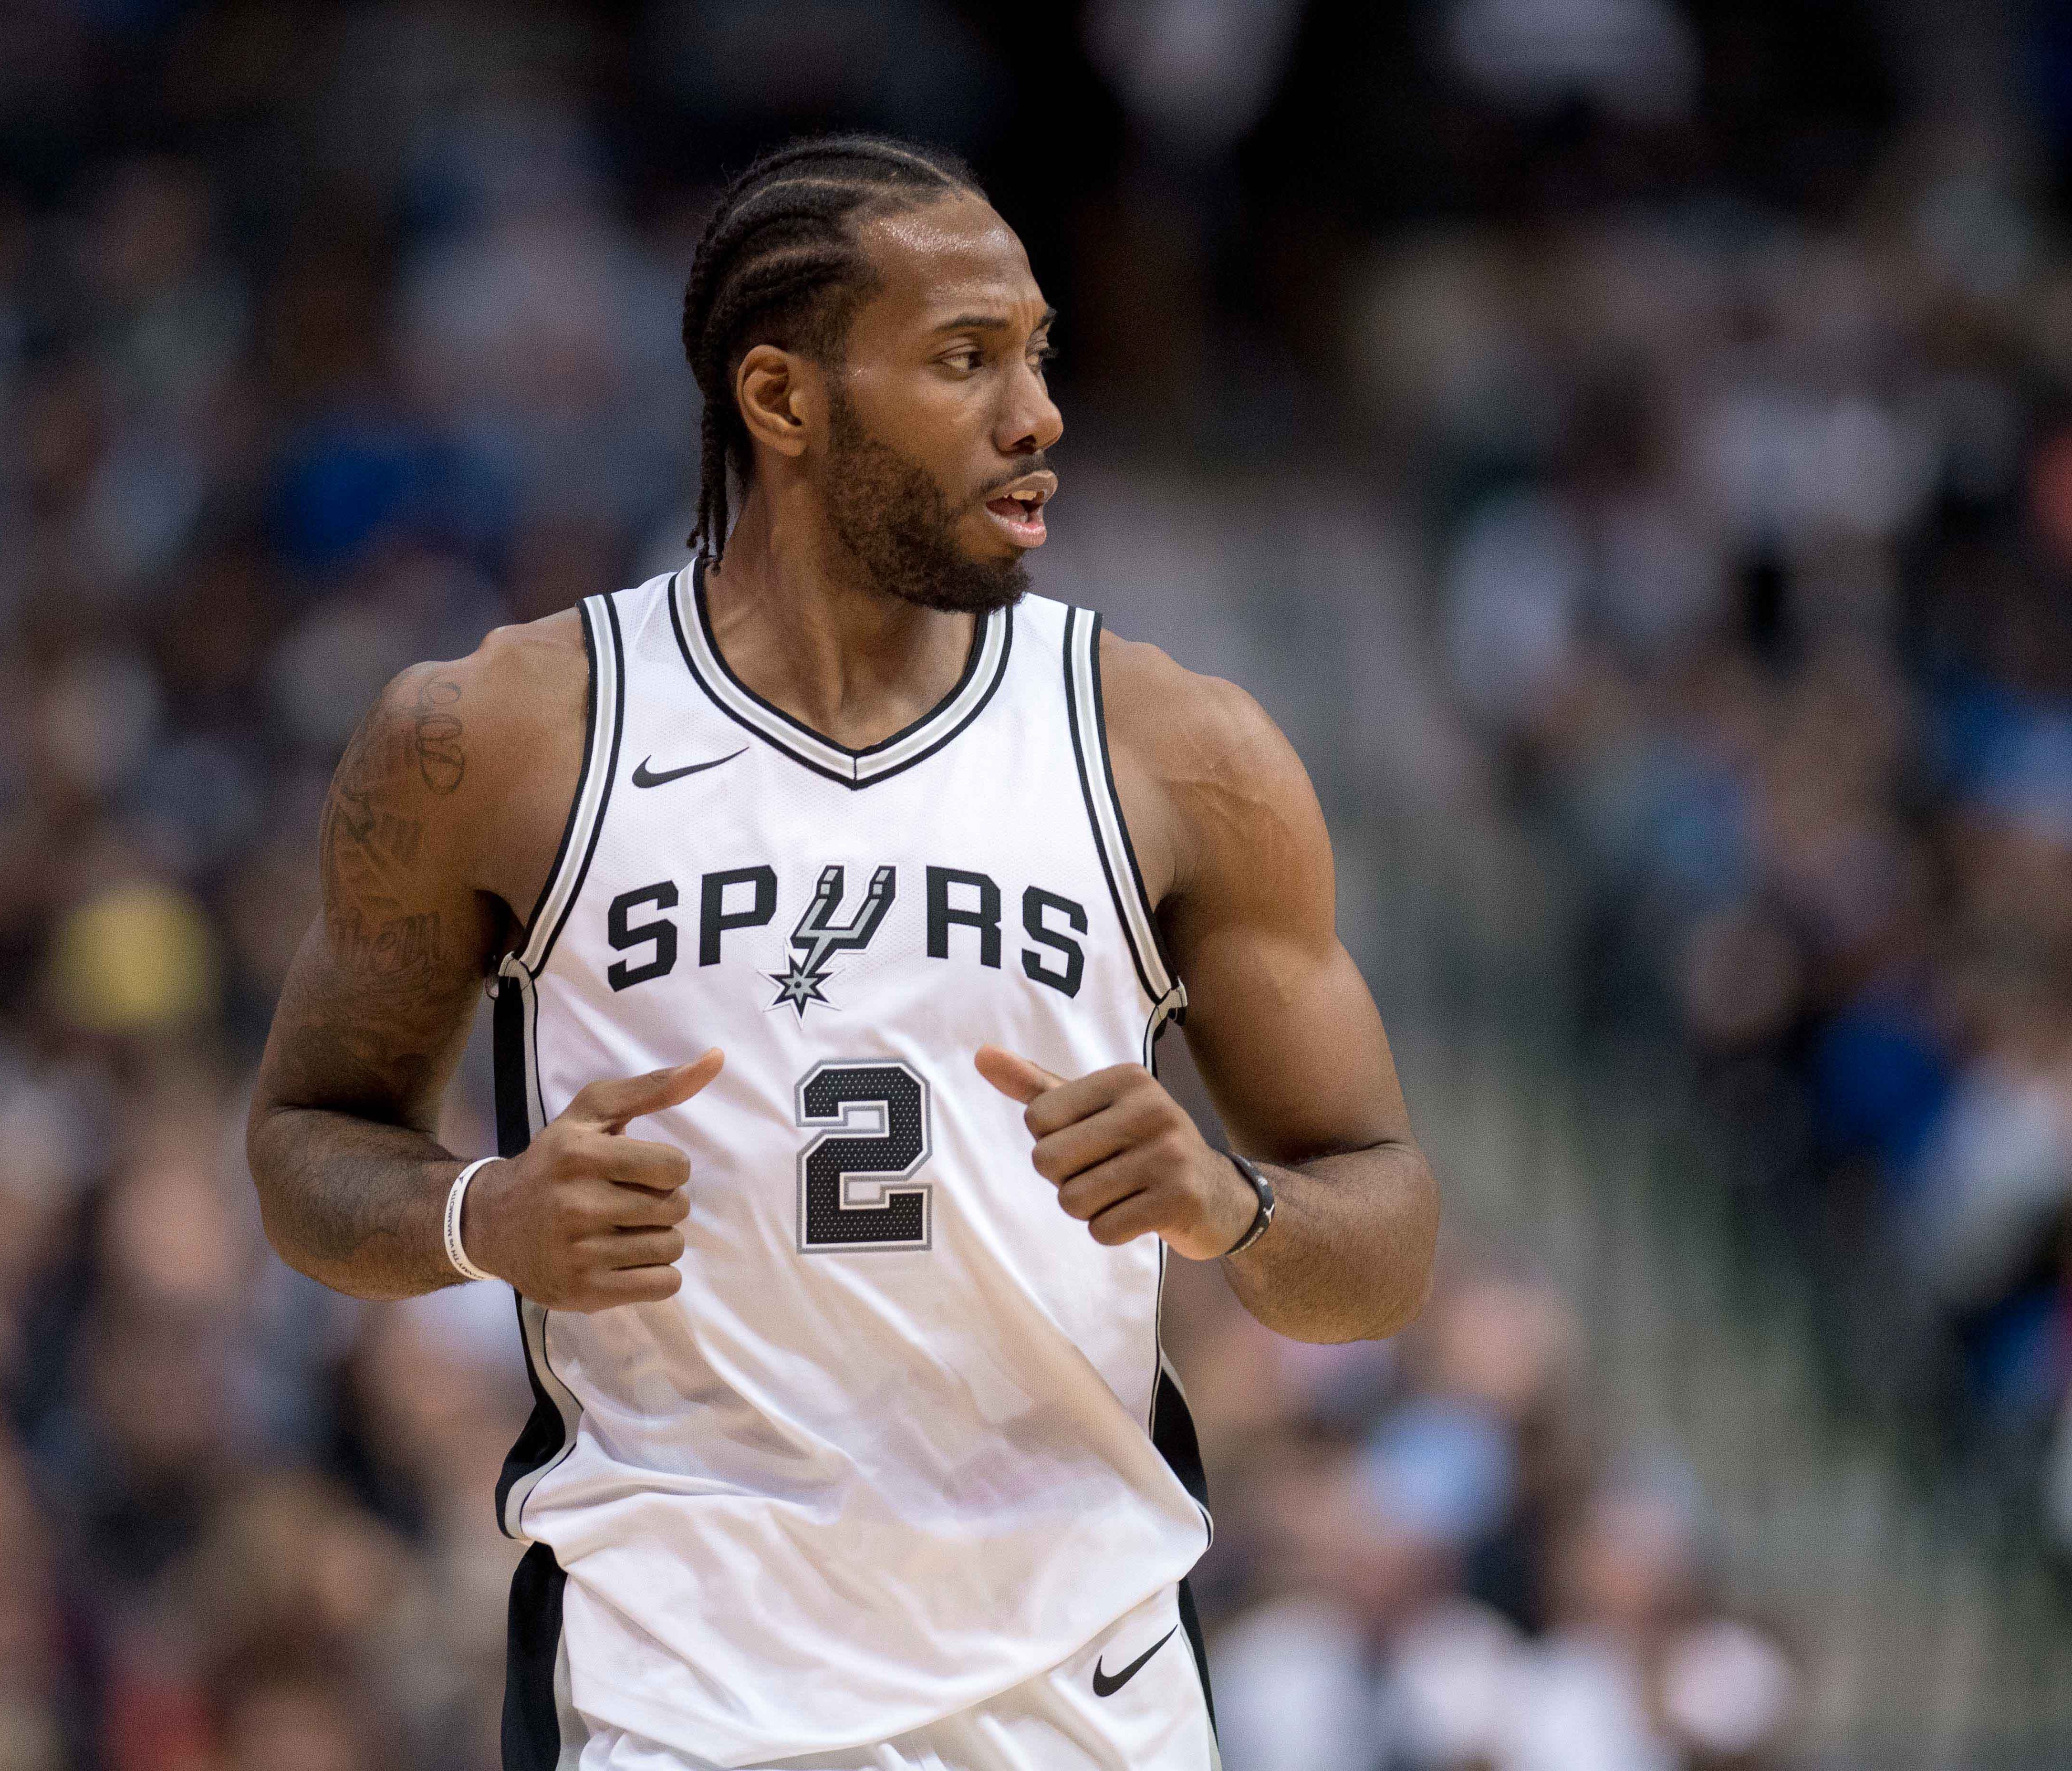 San Antonio Spurs forward Kawhi Leonard (2) in action during the game against the Dallas Mavericks at the American Airlines Center.